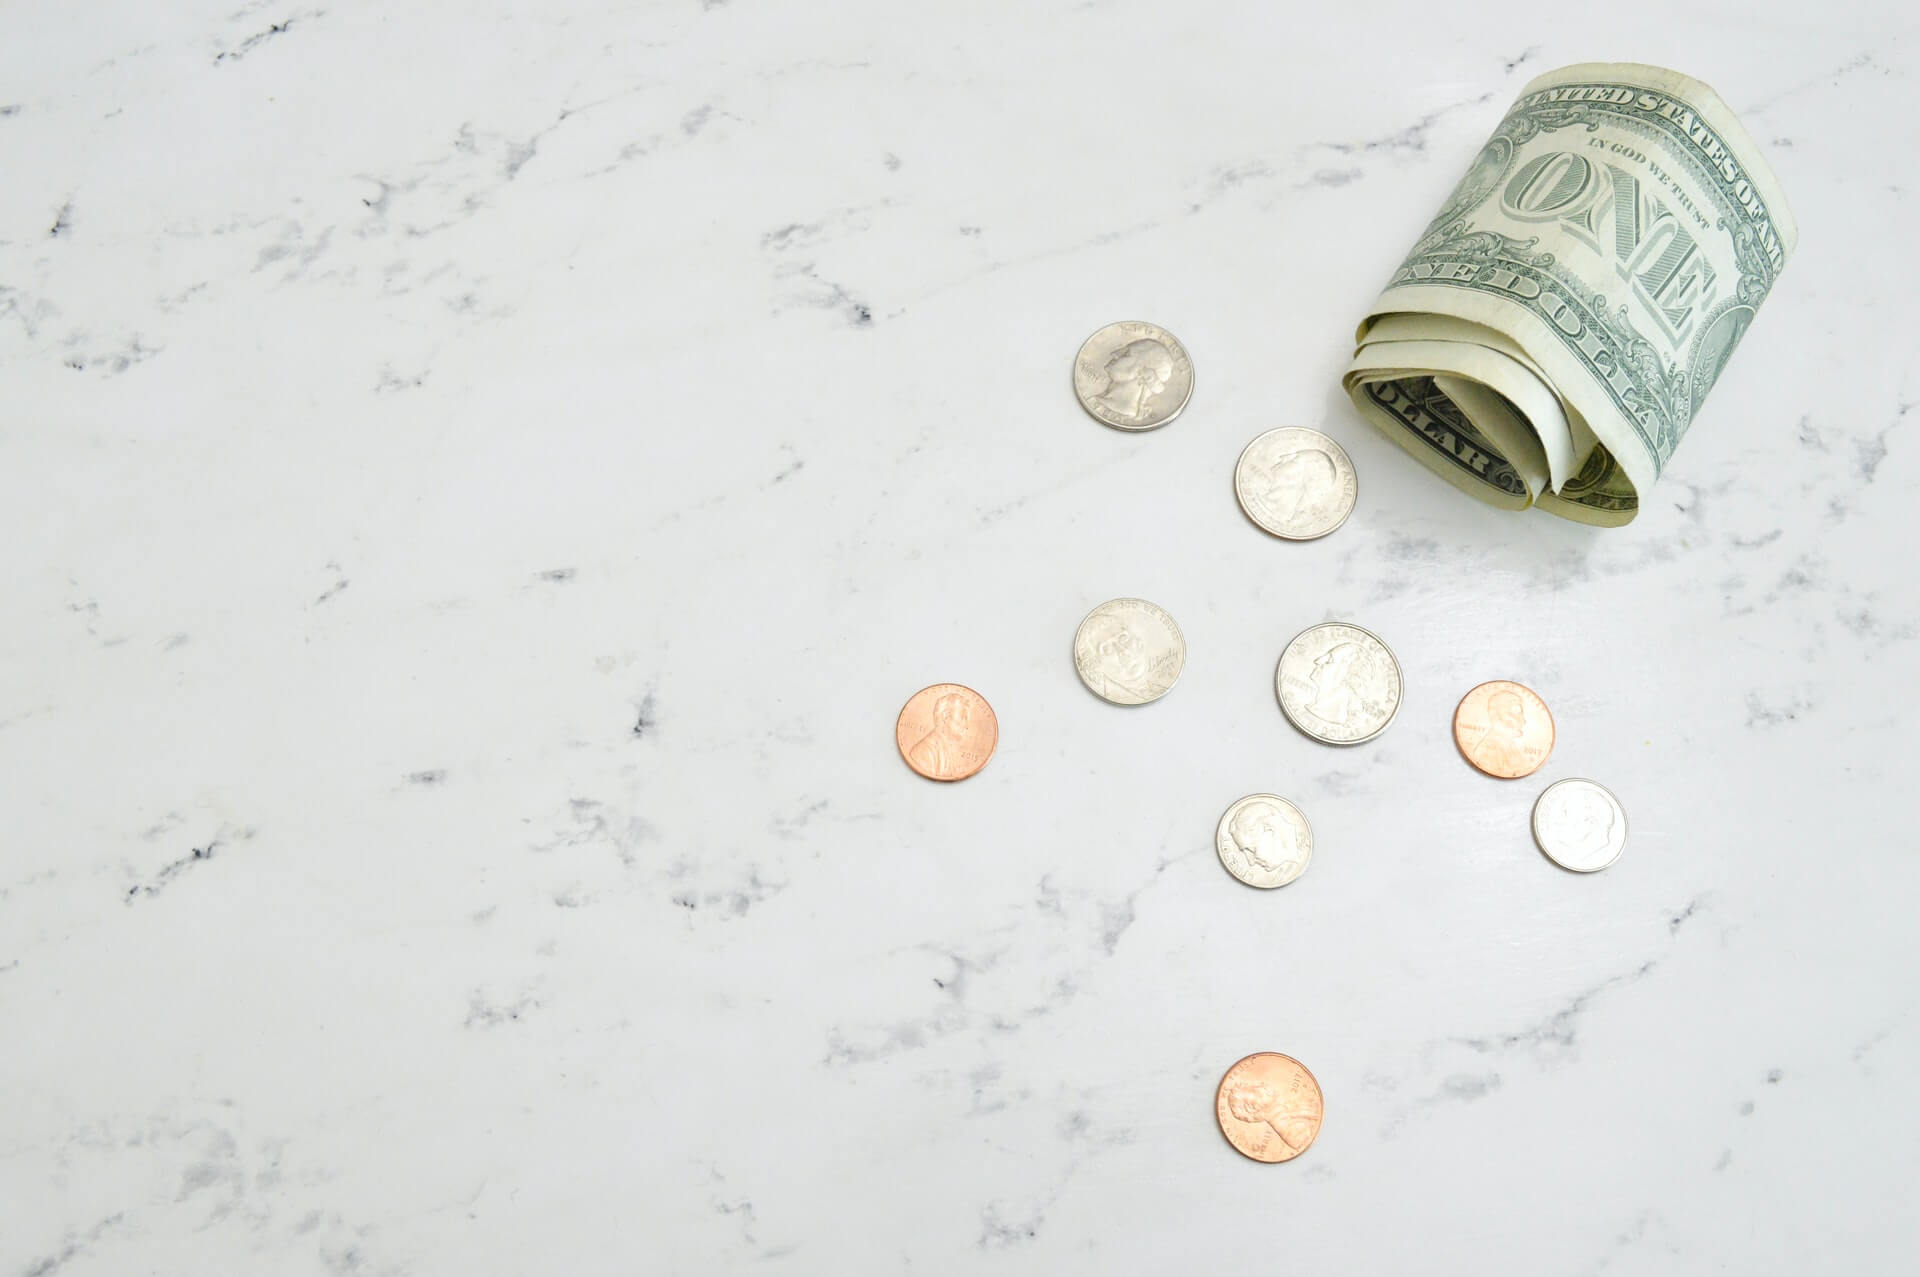 Image of coins and a dollar bill on marble